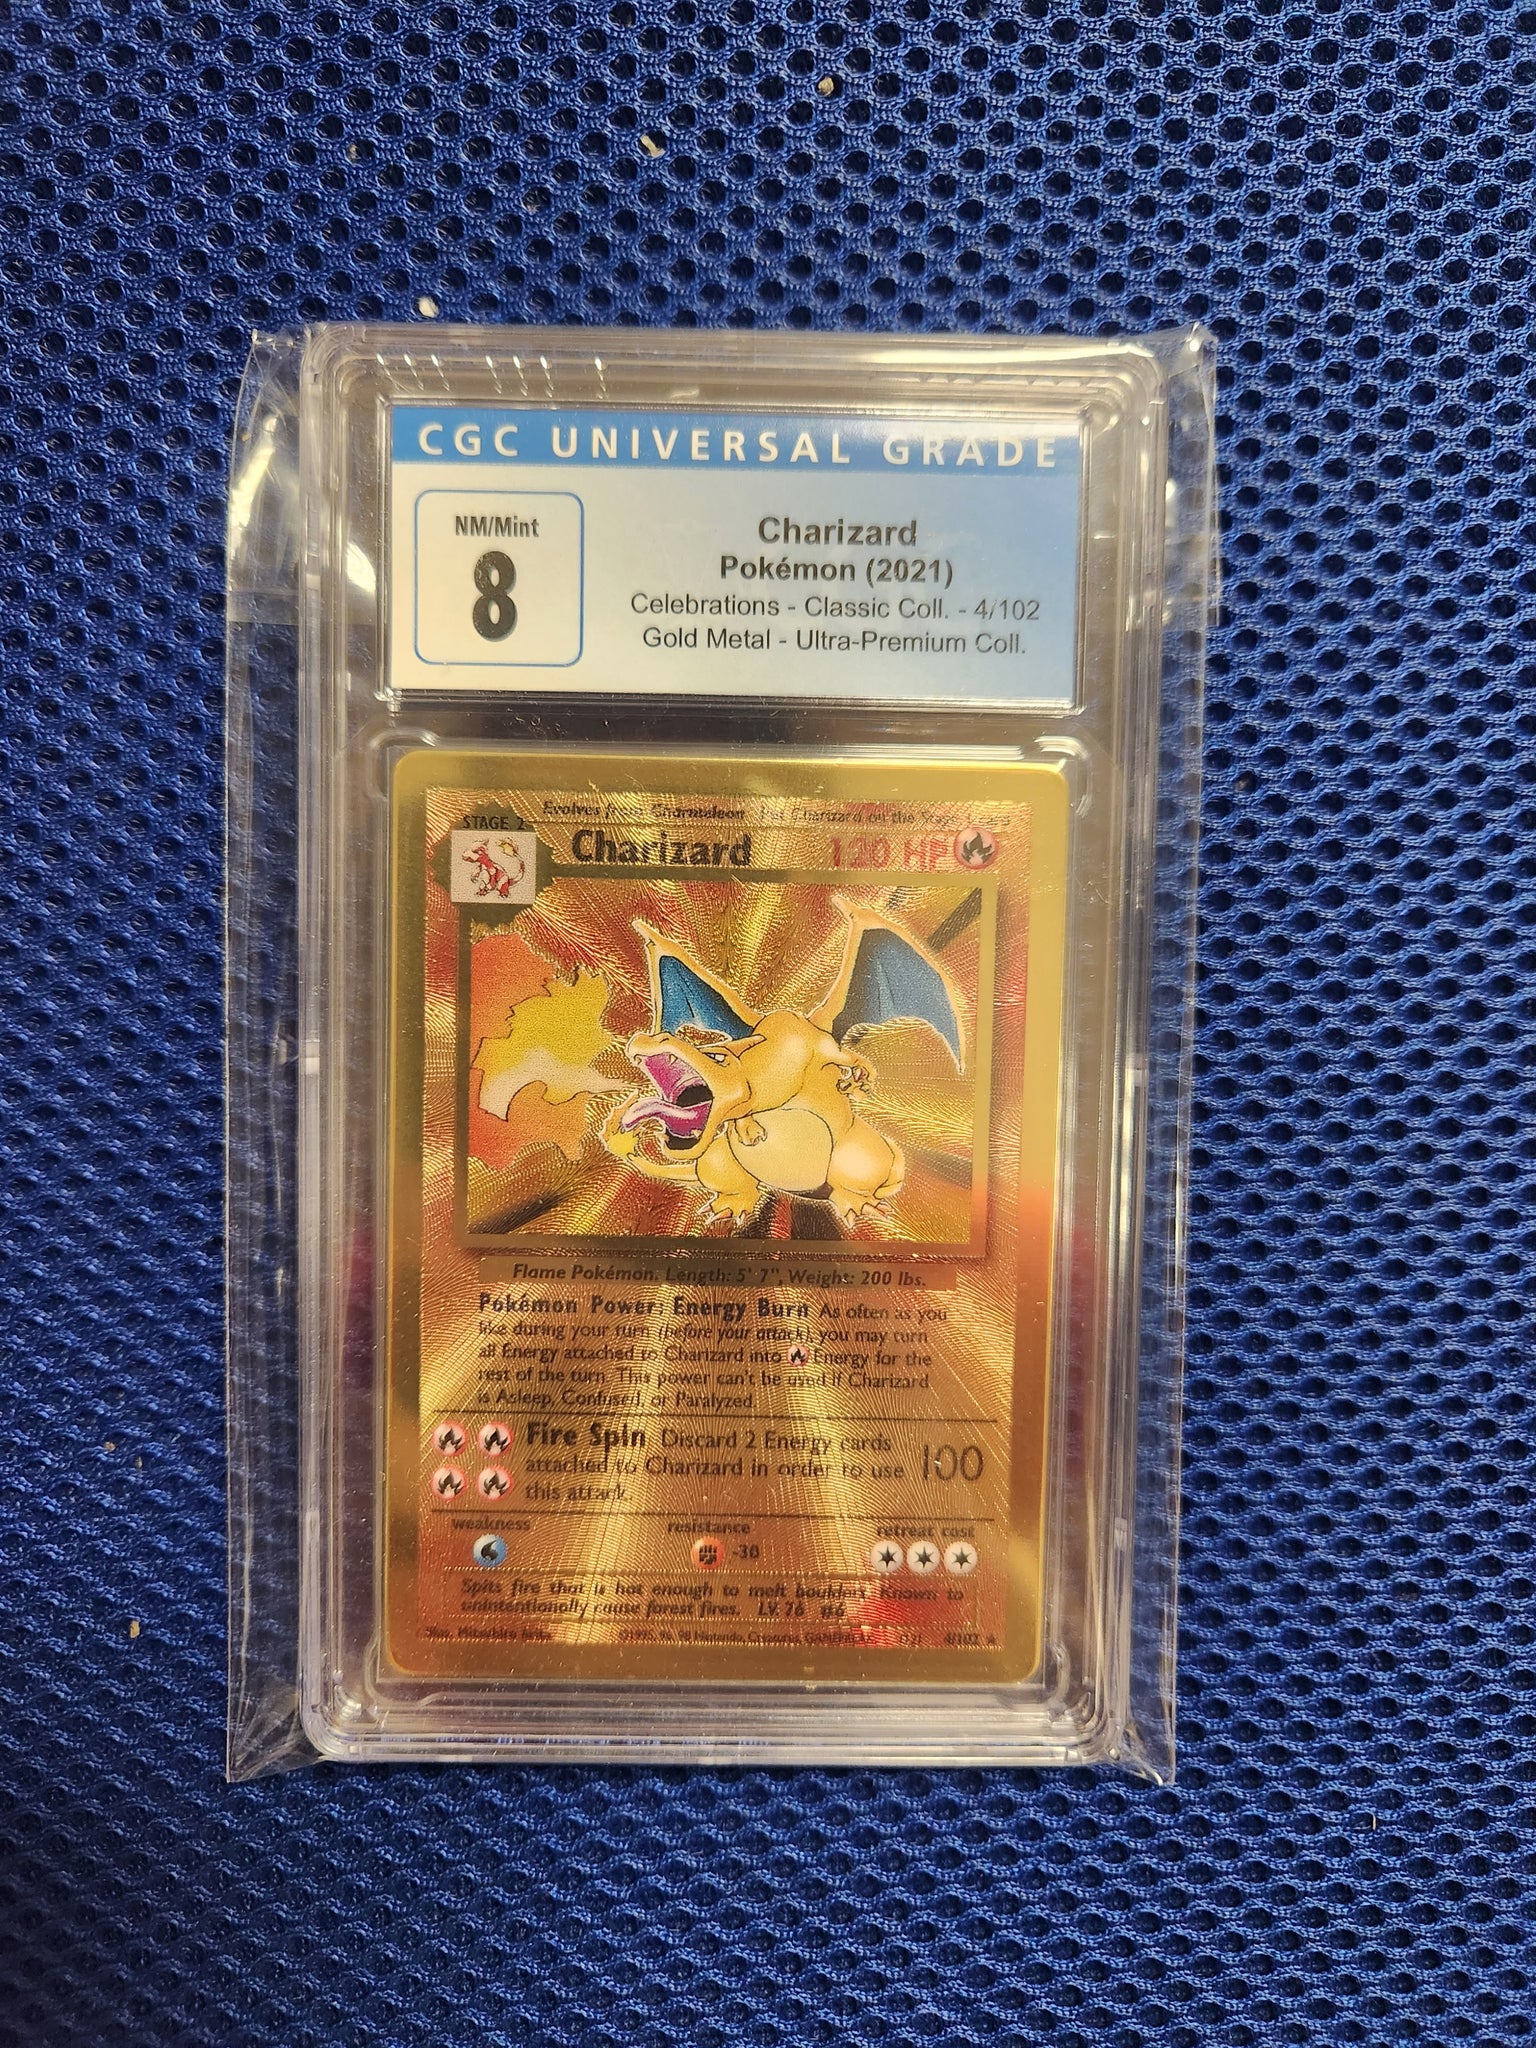 Charizard - Pokemon (2021) - Celebrations - Classic Collection - 4/102 - Gold Metal - Ultra Premium Collection - CGC Graded 8